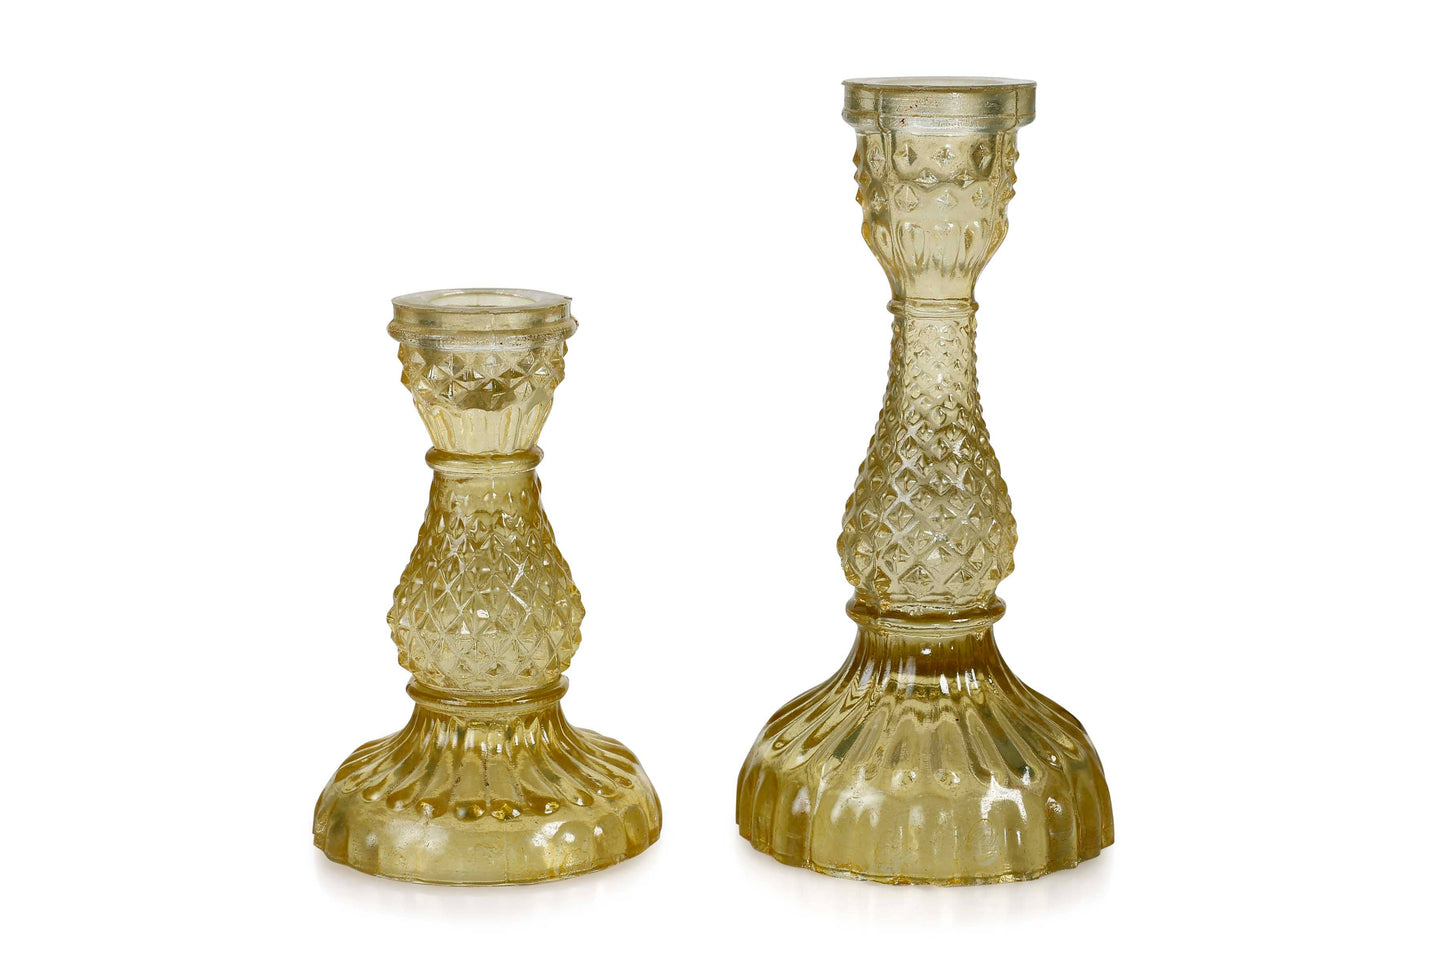 Vintage Glass Candle Stick Holder Set of 2 - Yellow - Curated Home Decor